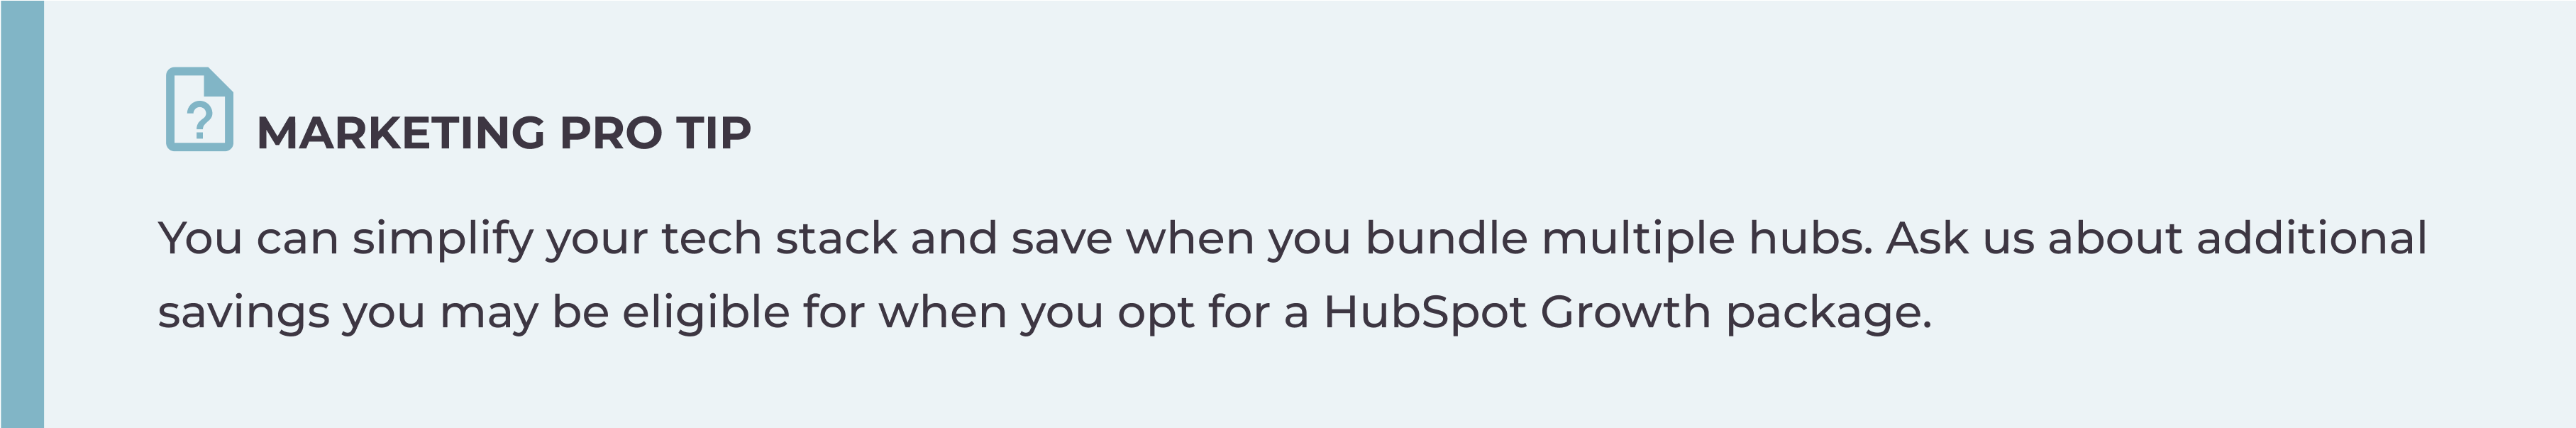 You can simplify your tech stack and save when you bundle multiple hubs. Ask us about additional savings you may be eligible for when you opt for a HubSpot Growth package.